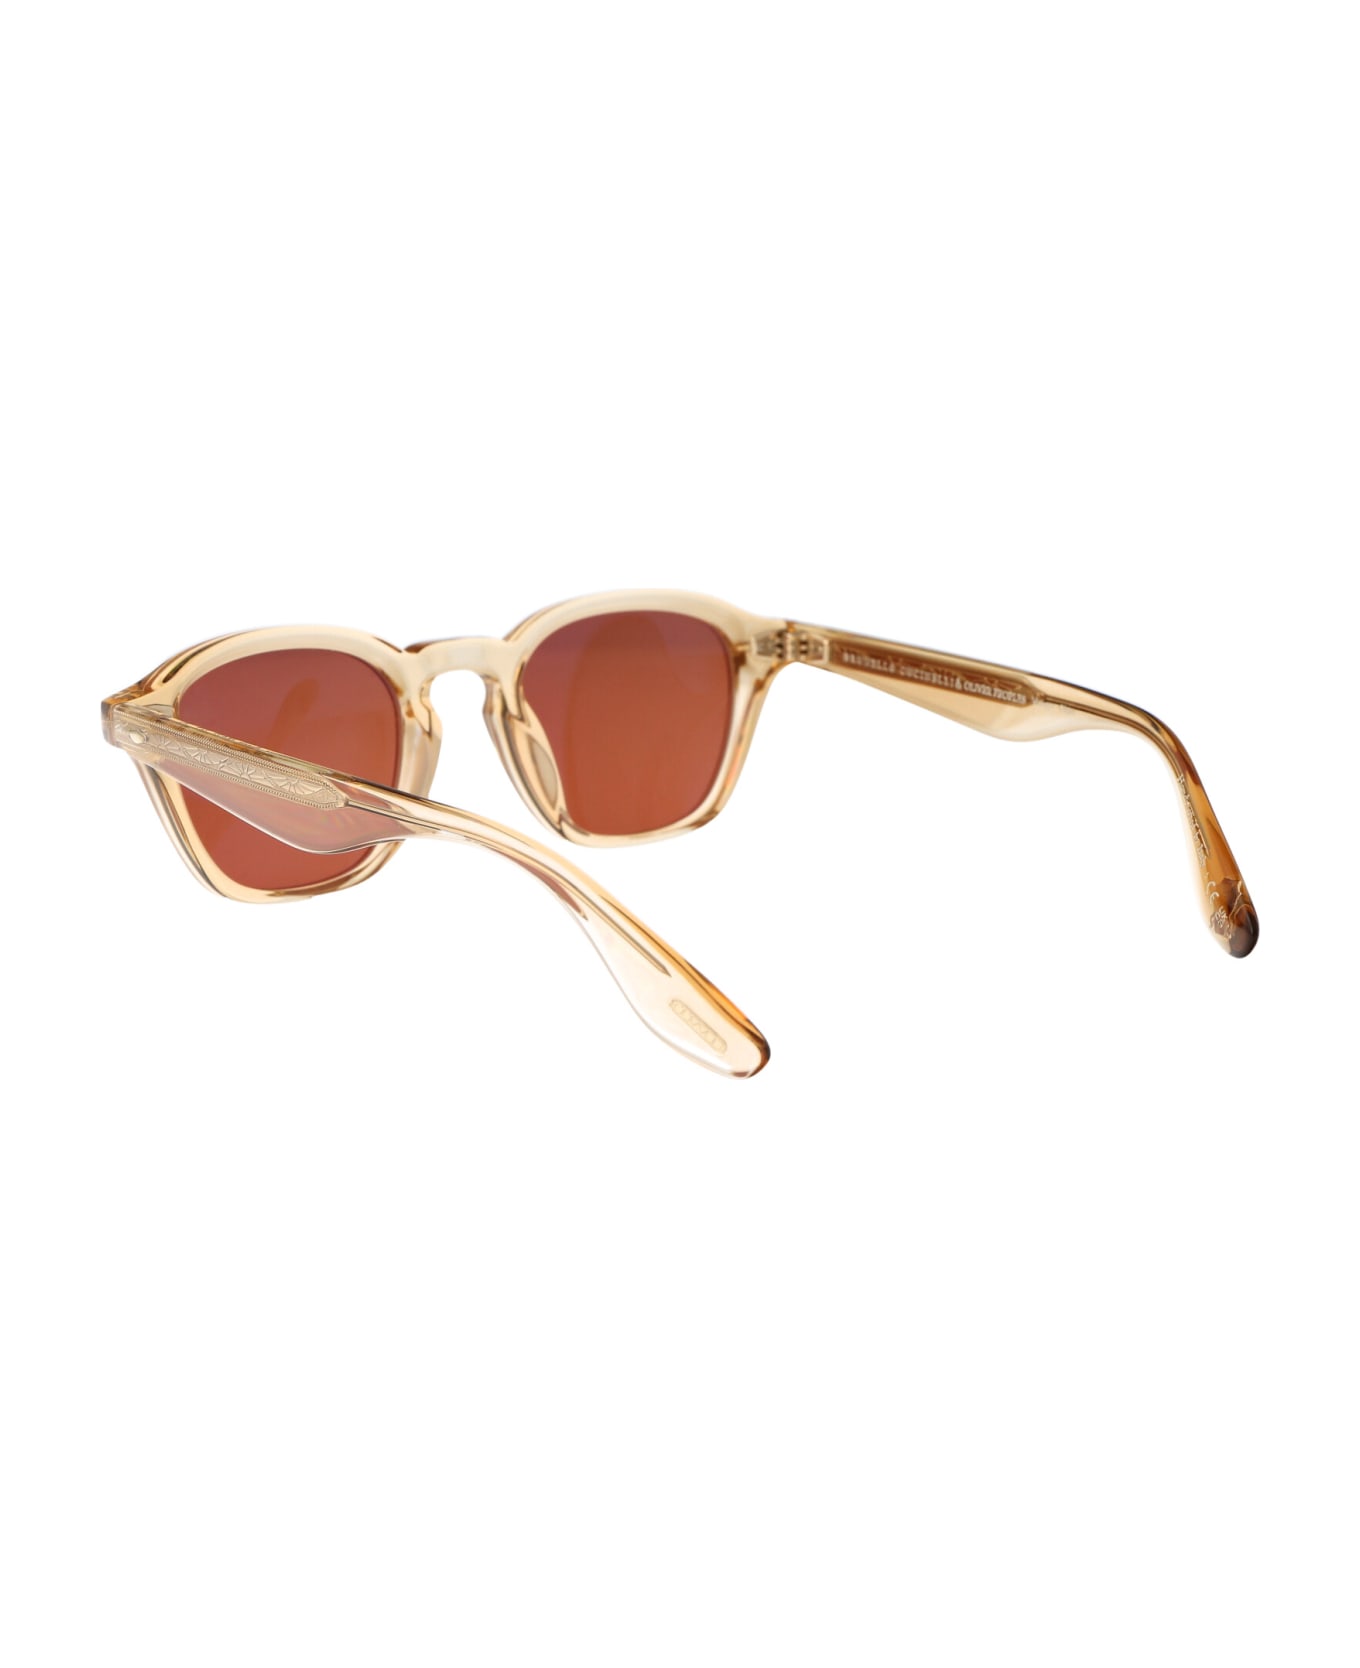 Oliver Peoples Peppe Sunglasses - 176653 Champagne